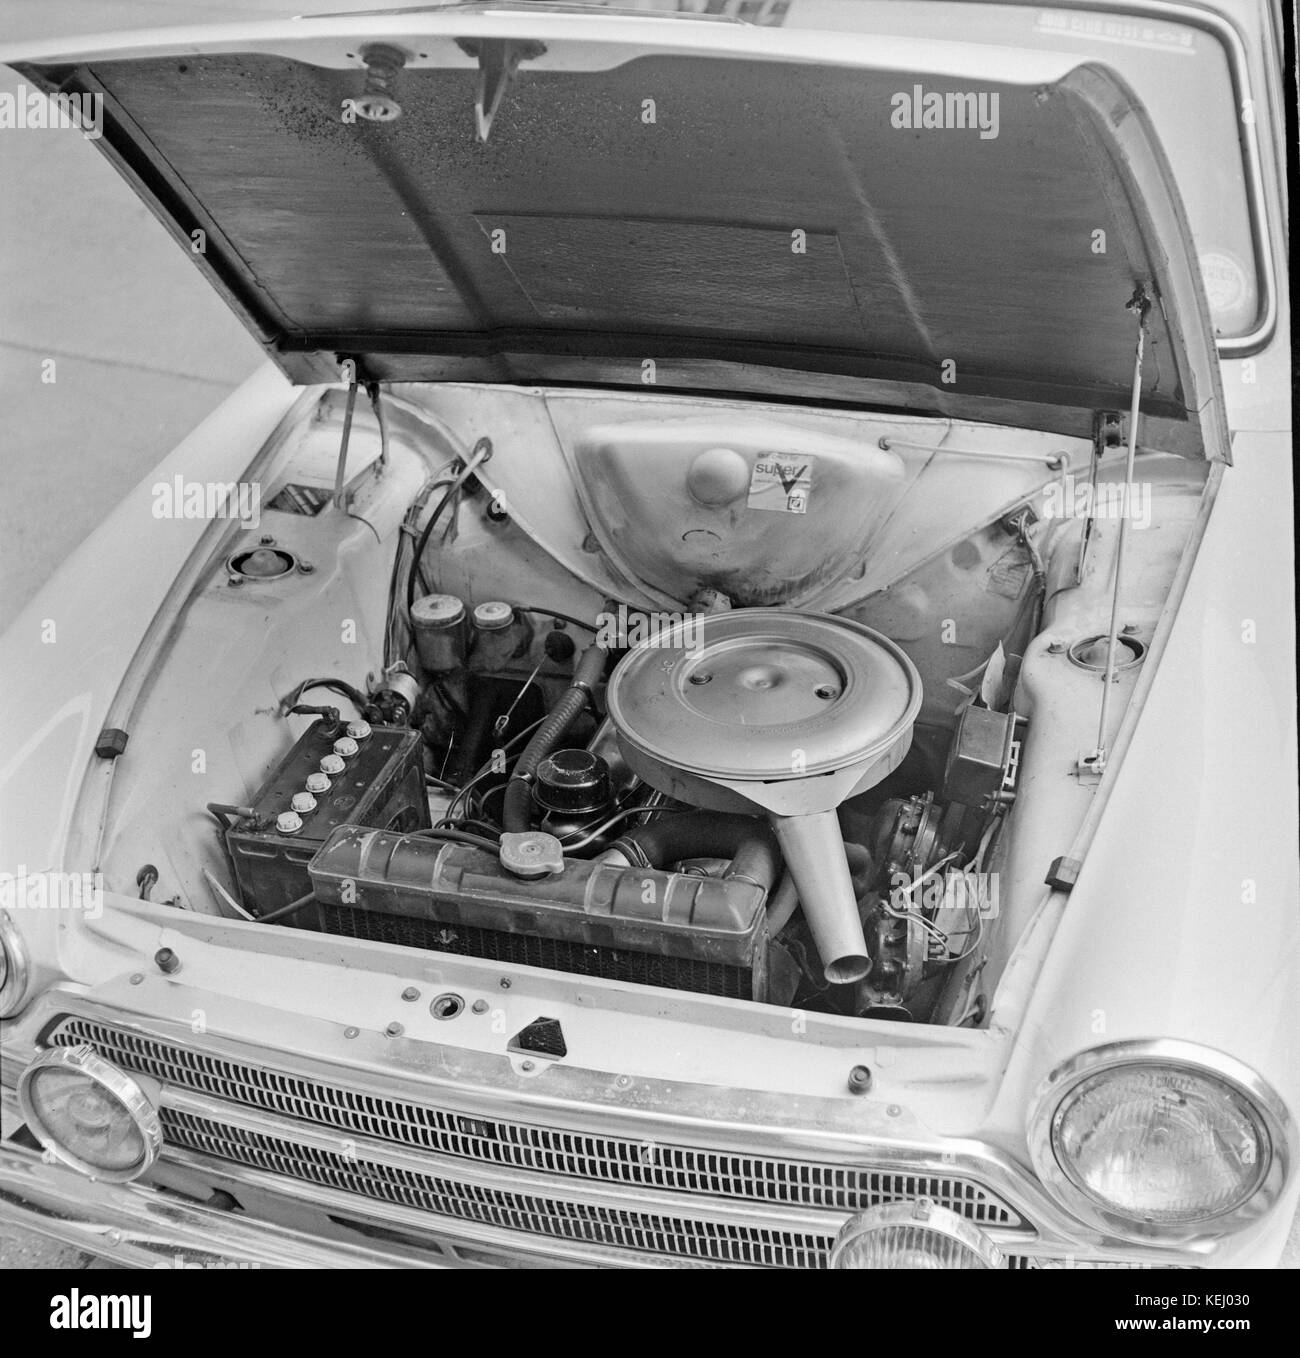 Press photos of the engine bay of a 1966 Ford Cortina Mk 1 GT, shown  outside Newspaper House in London. Photos taken on 21st October 1966 Stock  Photo - Alamy